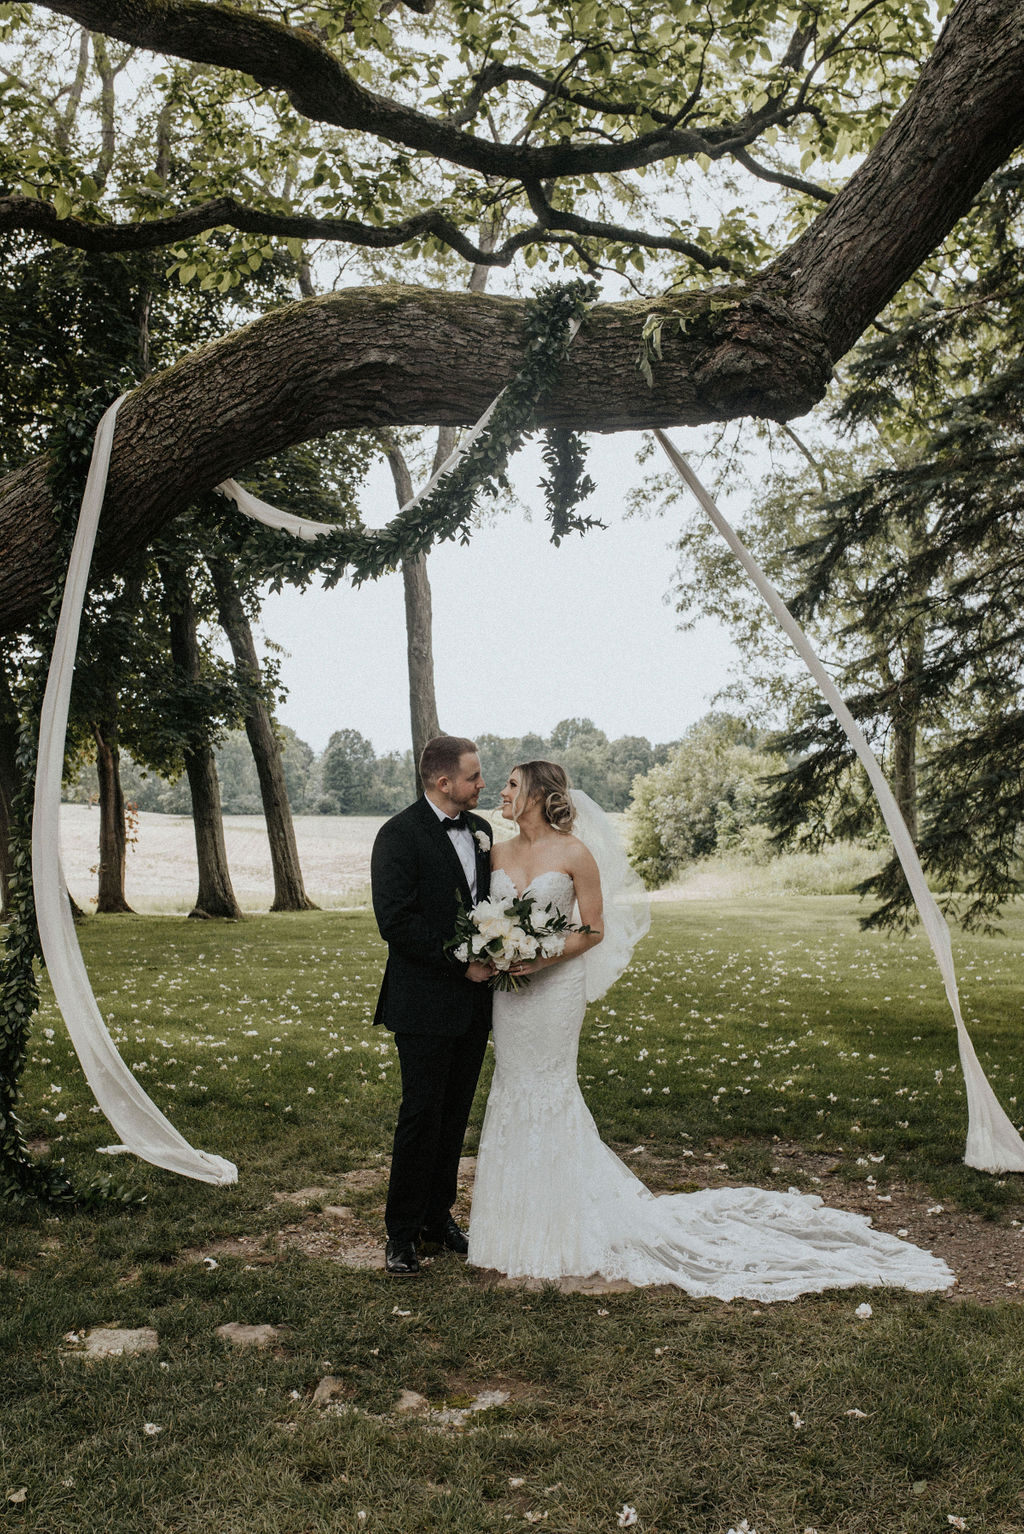 A couple smiling in front of their ceremony tree